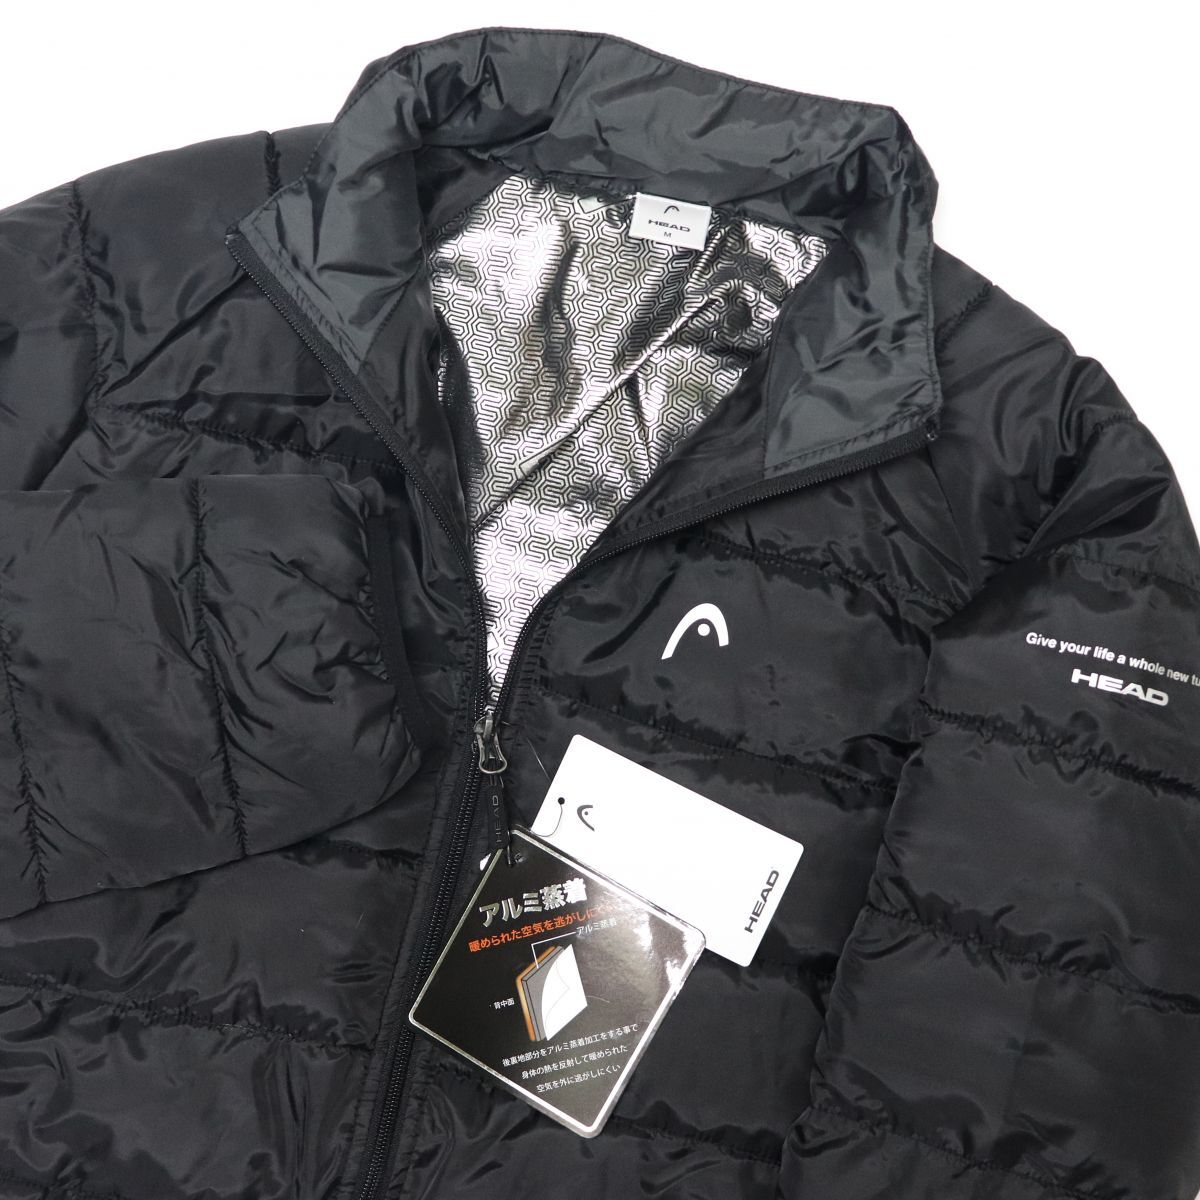 * head HEAD new goods men's aluminium raise of temperature . windshield cold thick cotton inside heat insulation blouson jacket black XL size [1234002A2H-17-LL] one two three *QWER